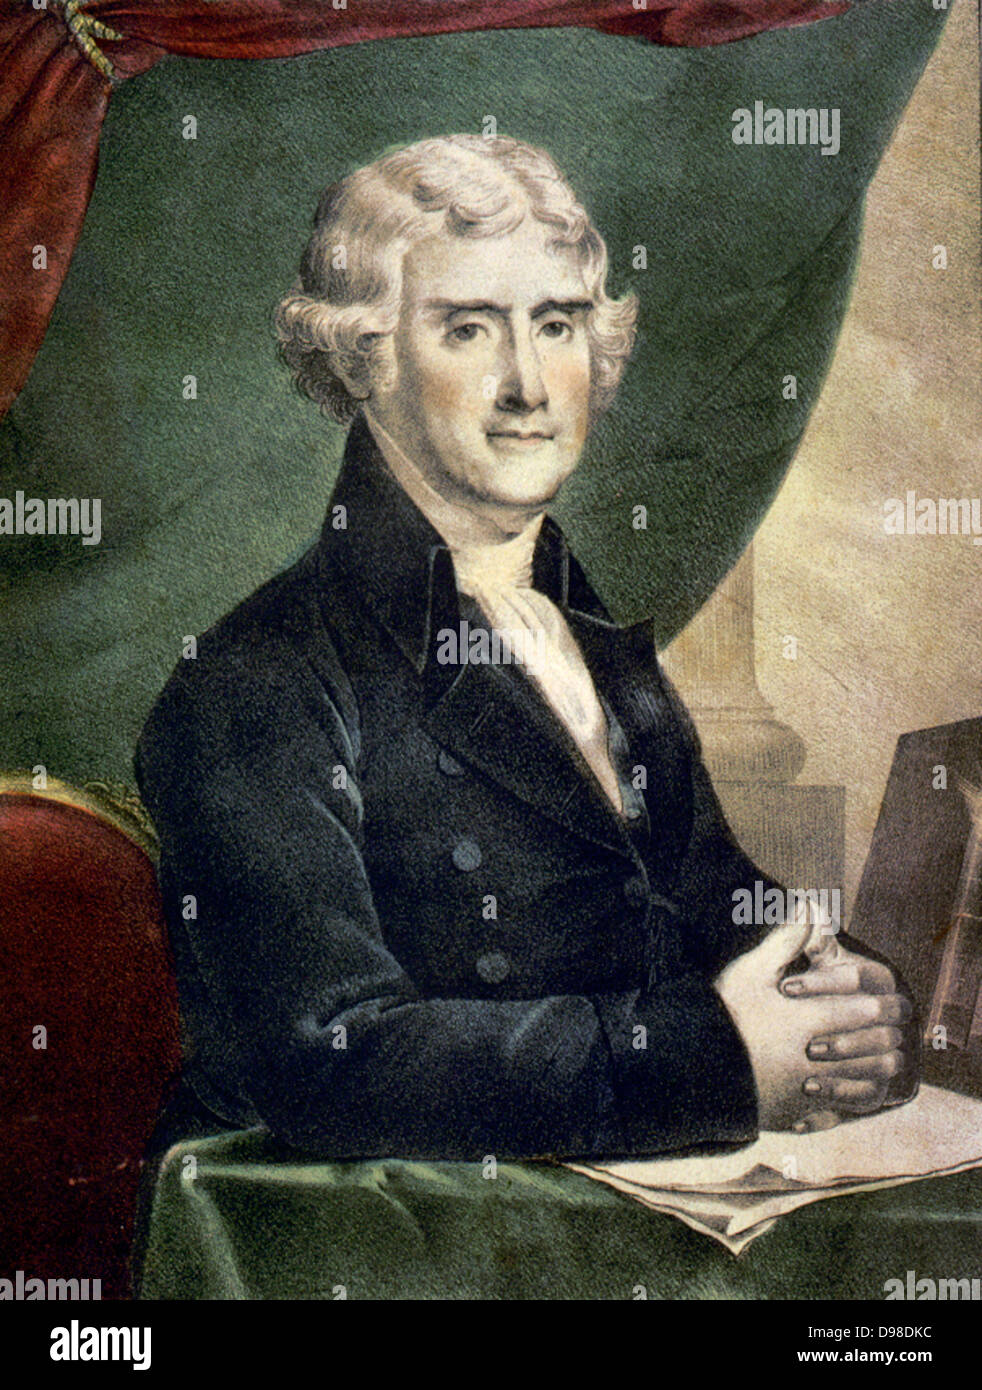 Thomas Jefferson (1743-1826) Third President of the United States 1801-1809. Coloured lithograph half-length portrait of Jefferson seated at desk, c1845. Stock Photo